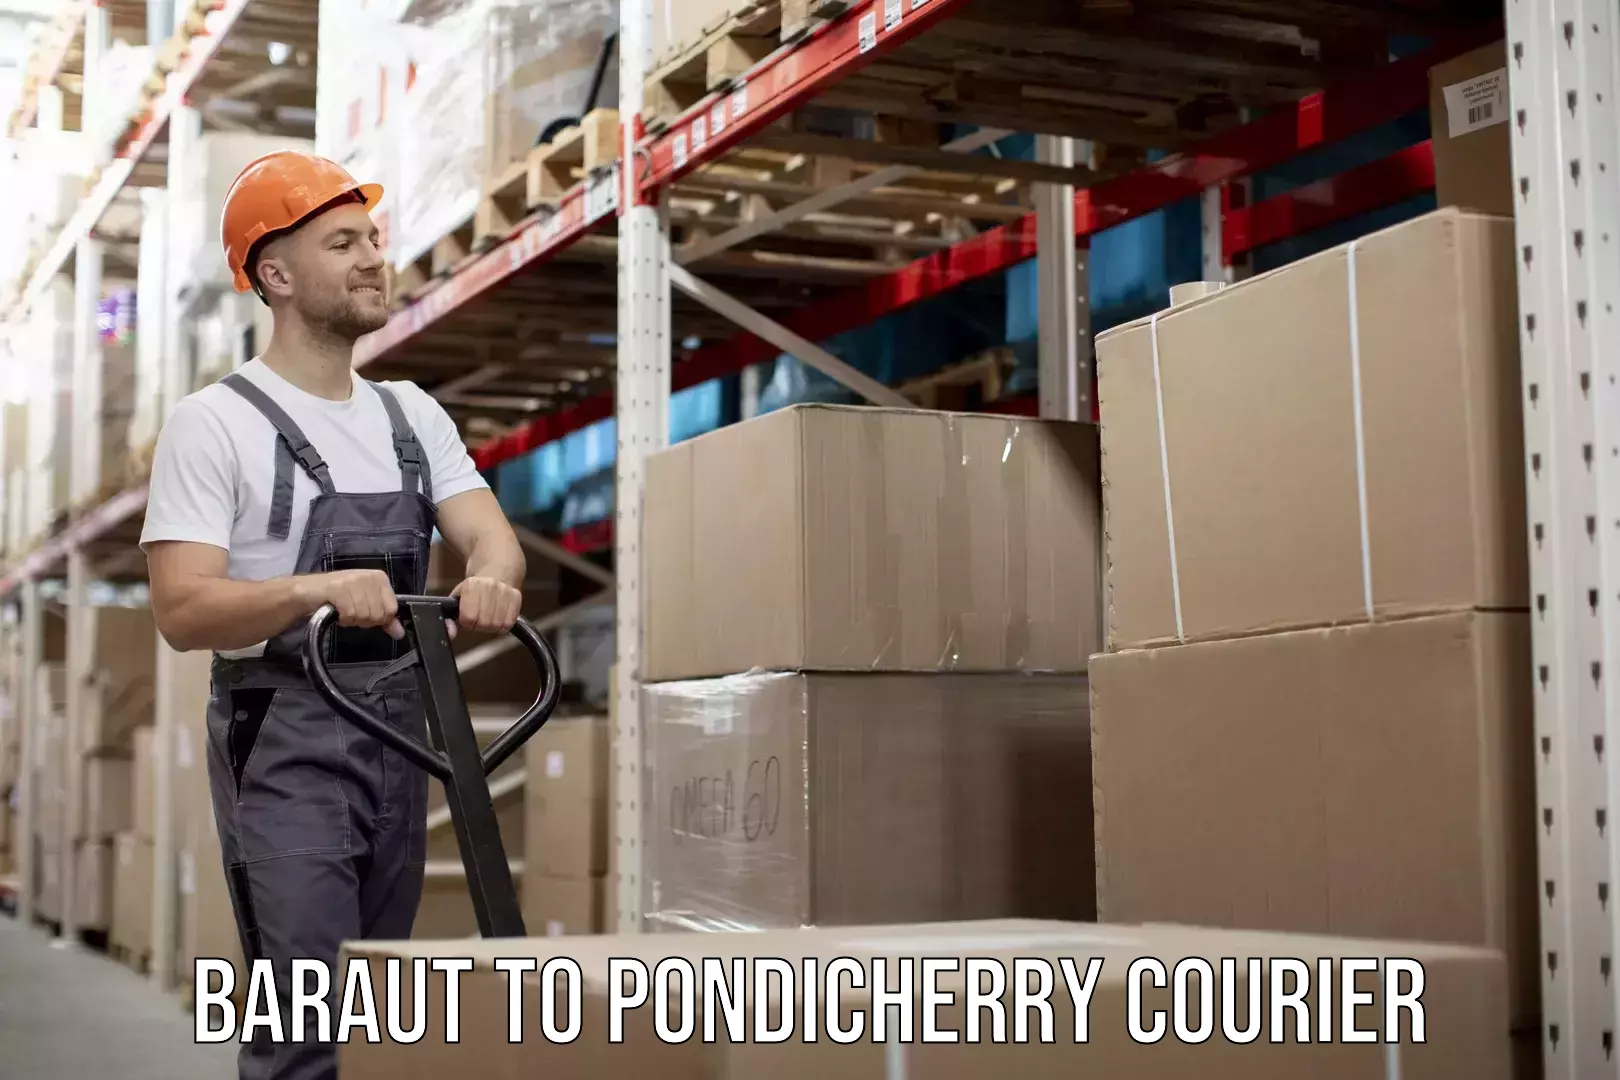 Quality courier partnerships Baraut to Pondicherry